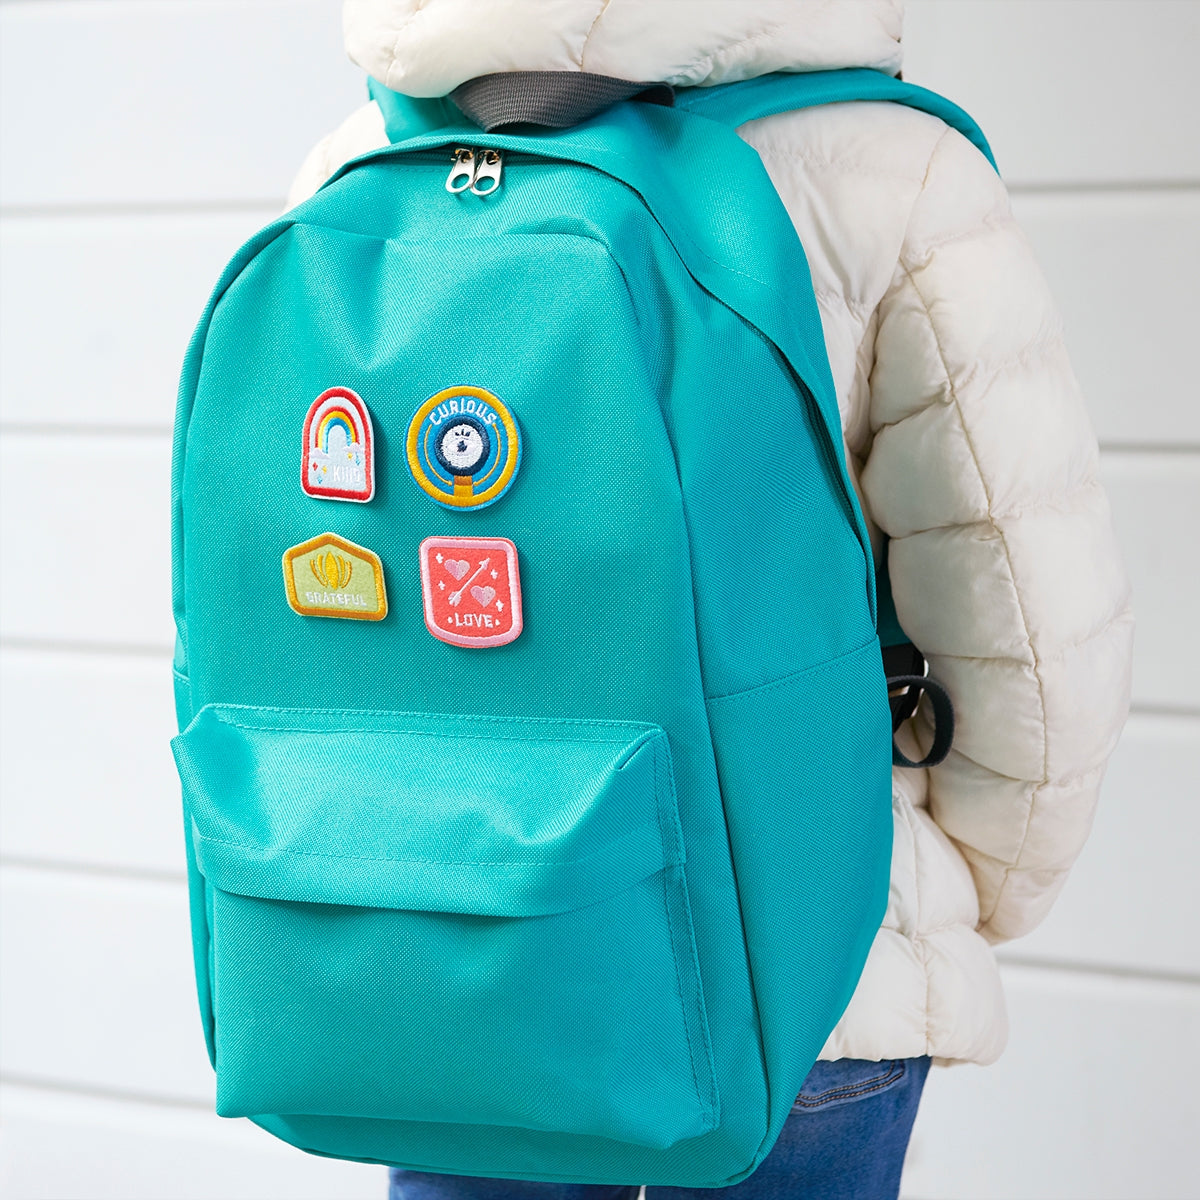 Set of 4 Character Badge Patches designed for children, featuring the words 'Creative, Funny, Team Player, Optimist' with vibrant colors, adhesive and iron-on backing, displayed on a aqua blue backpack.